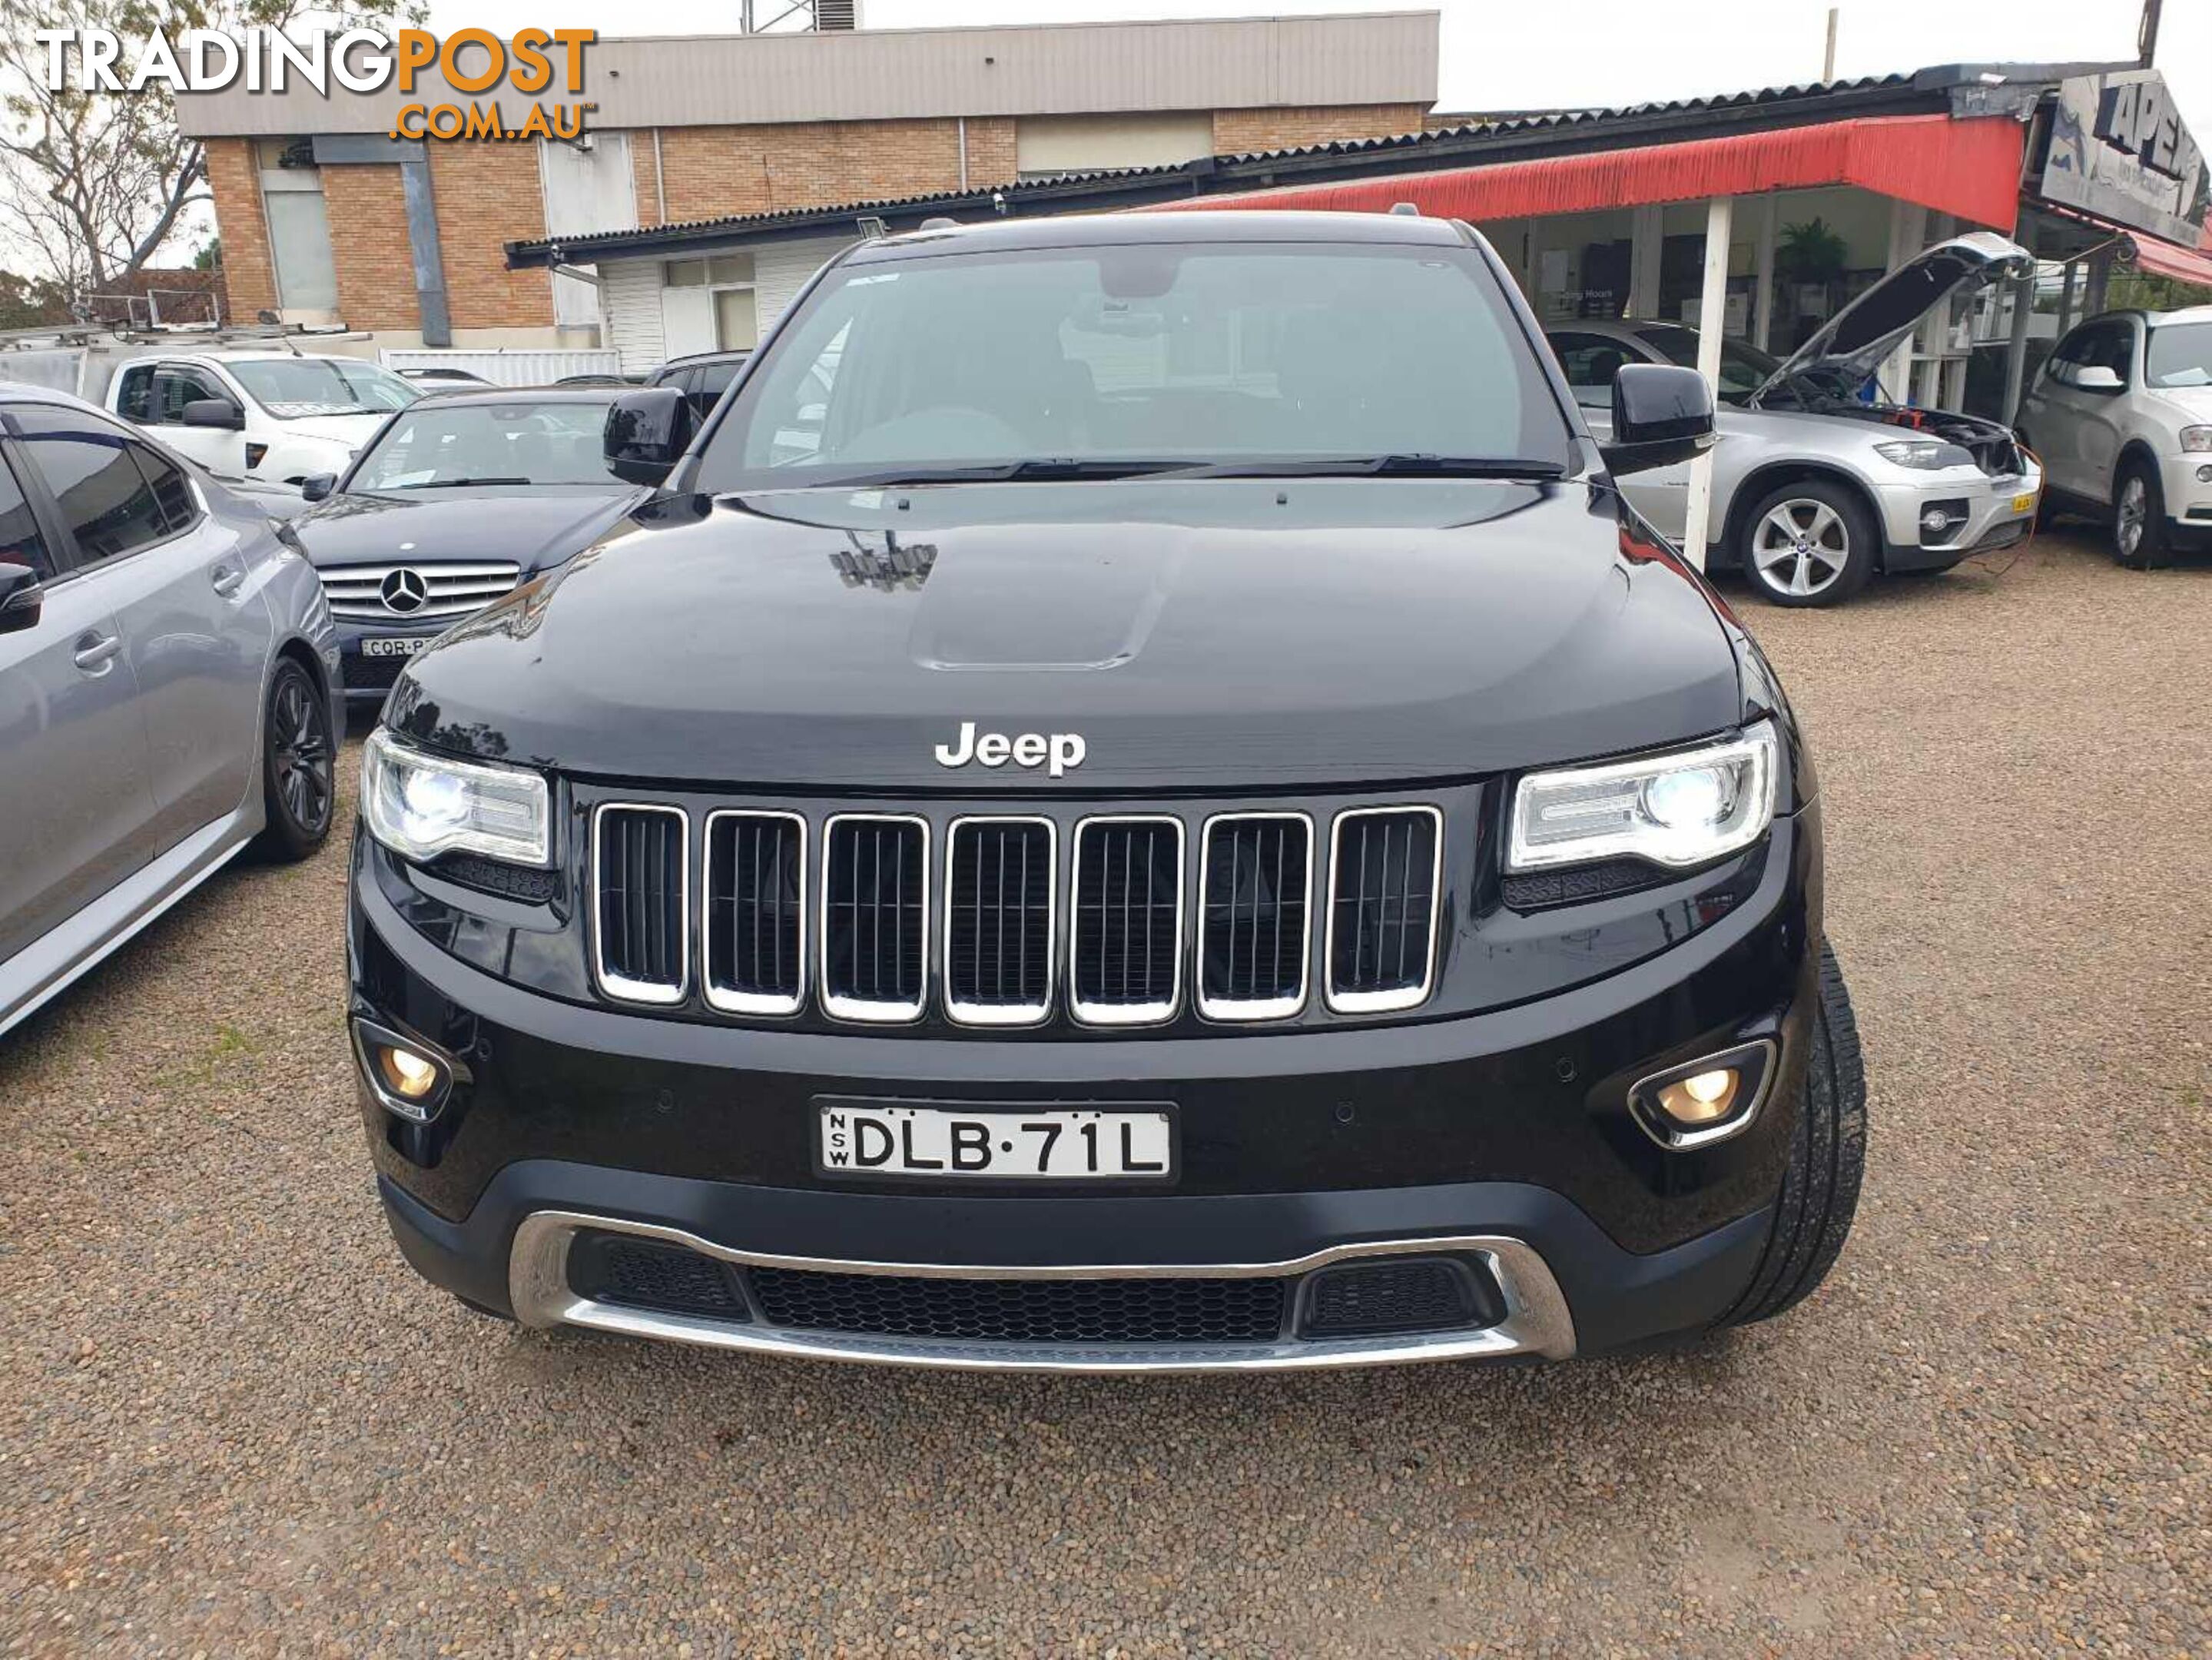 2016 JEEP GRANDCHEROKEE LIMITED WKMY15 4D WAGON